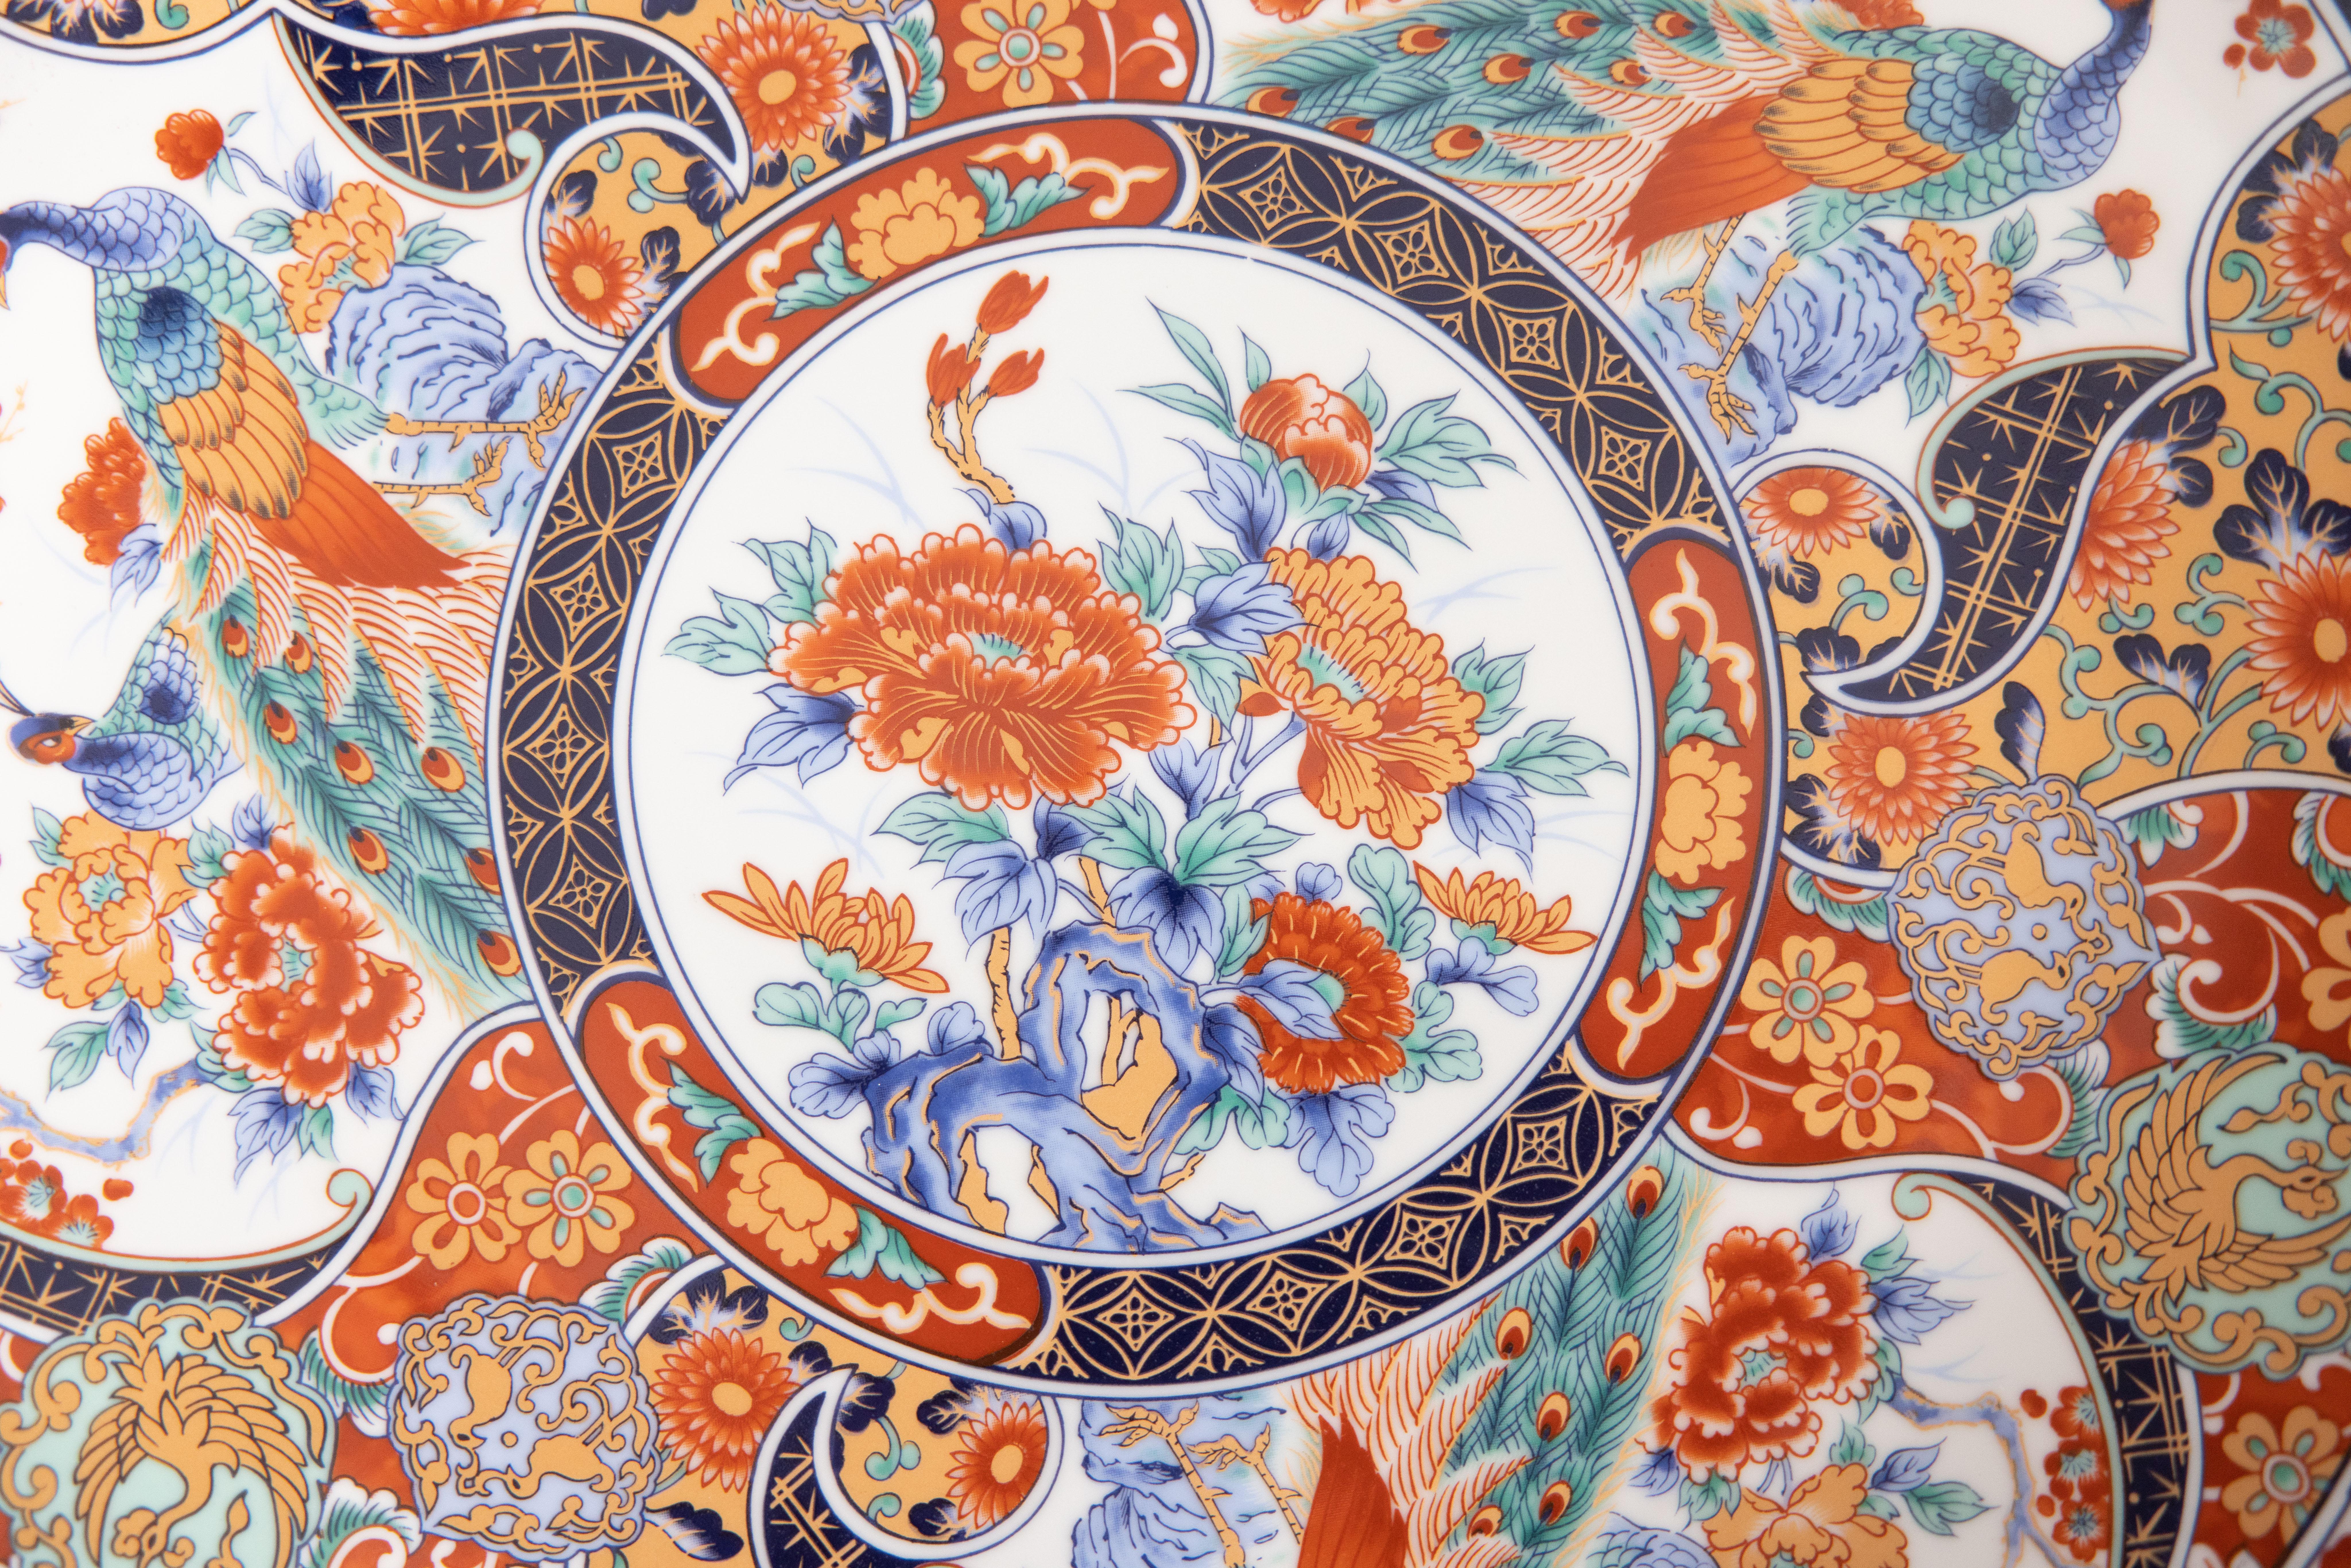 A gorgeous extra large Chinese Imari porcelain charger with a floral design and peacocks in the traditional Imari colors. Marked on underside with four Han characters. This fine large plate has lovely details and is quite heavy, weighing a